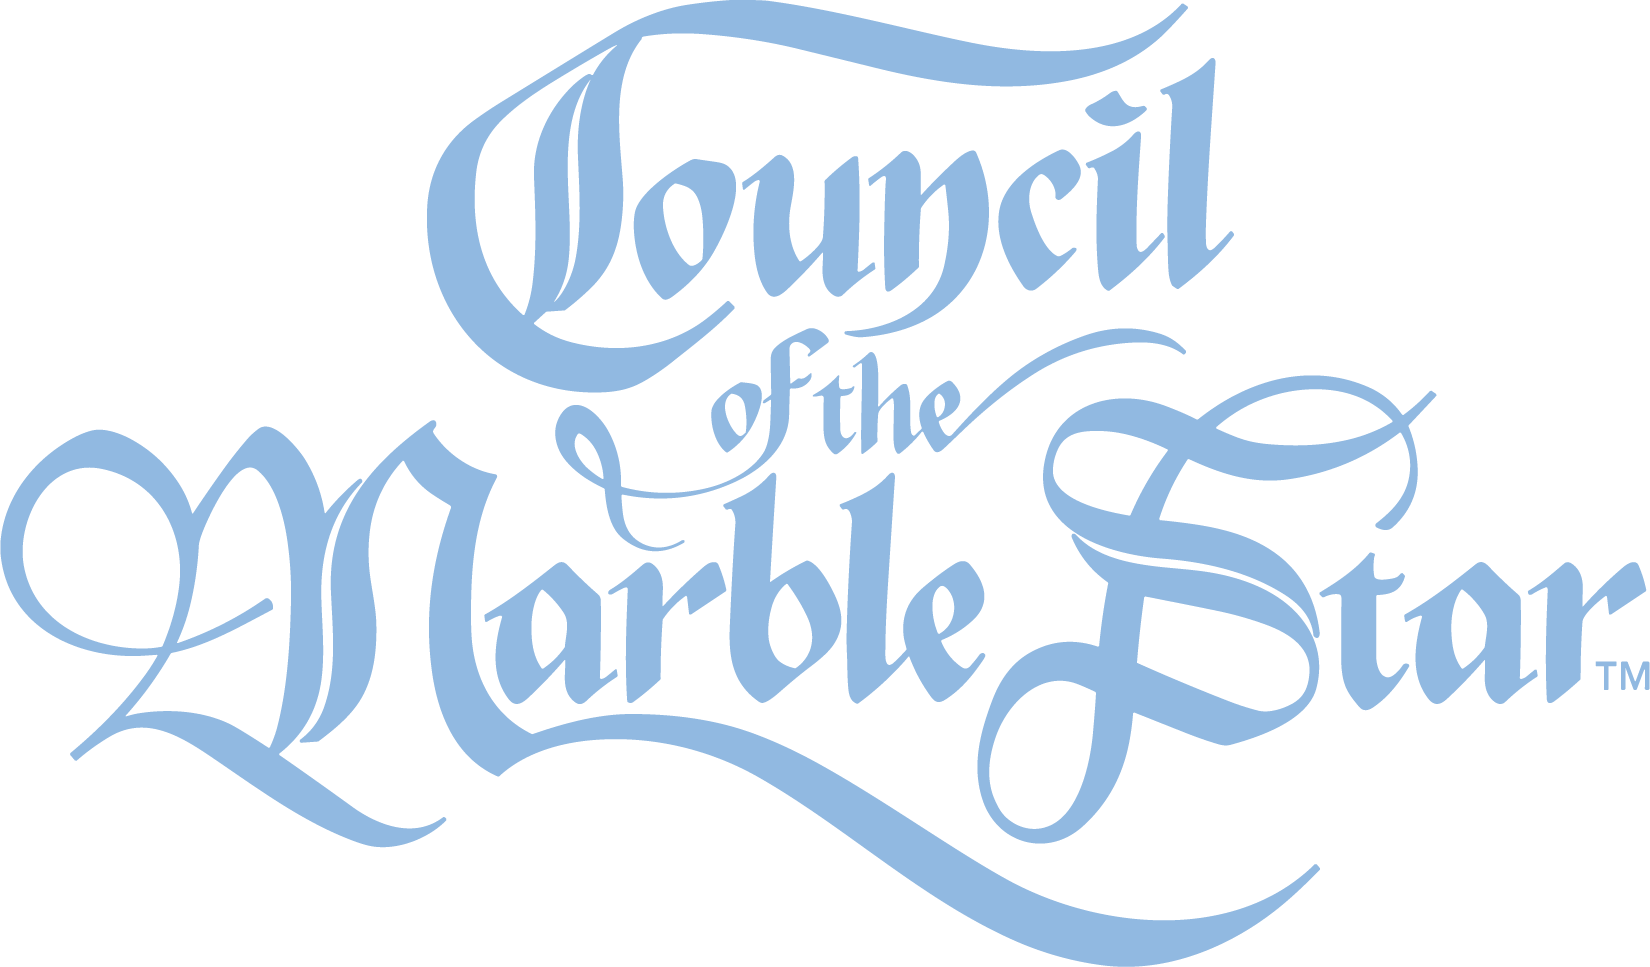 Council of the Marble Star Logo